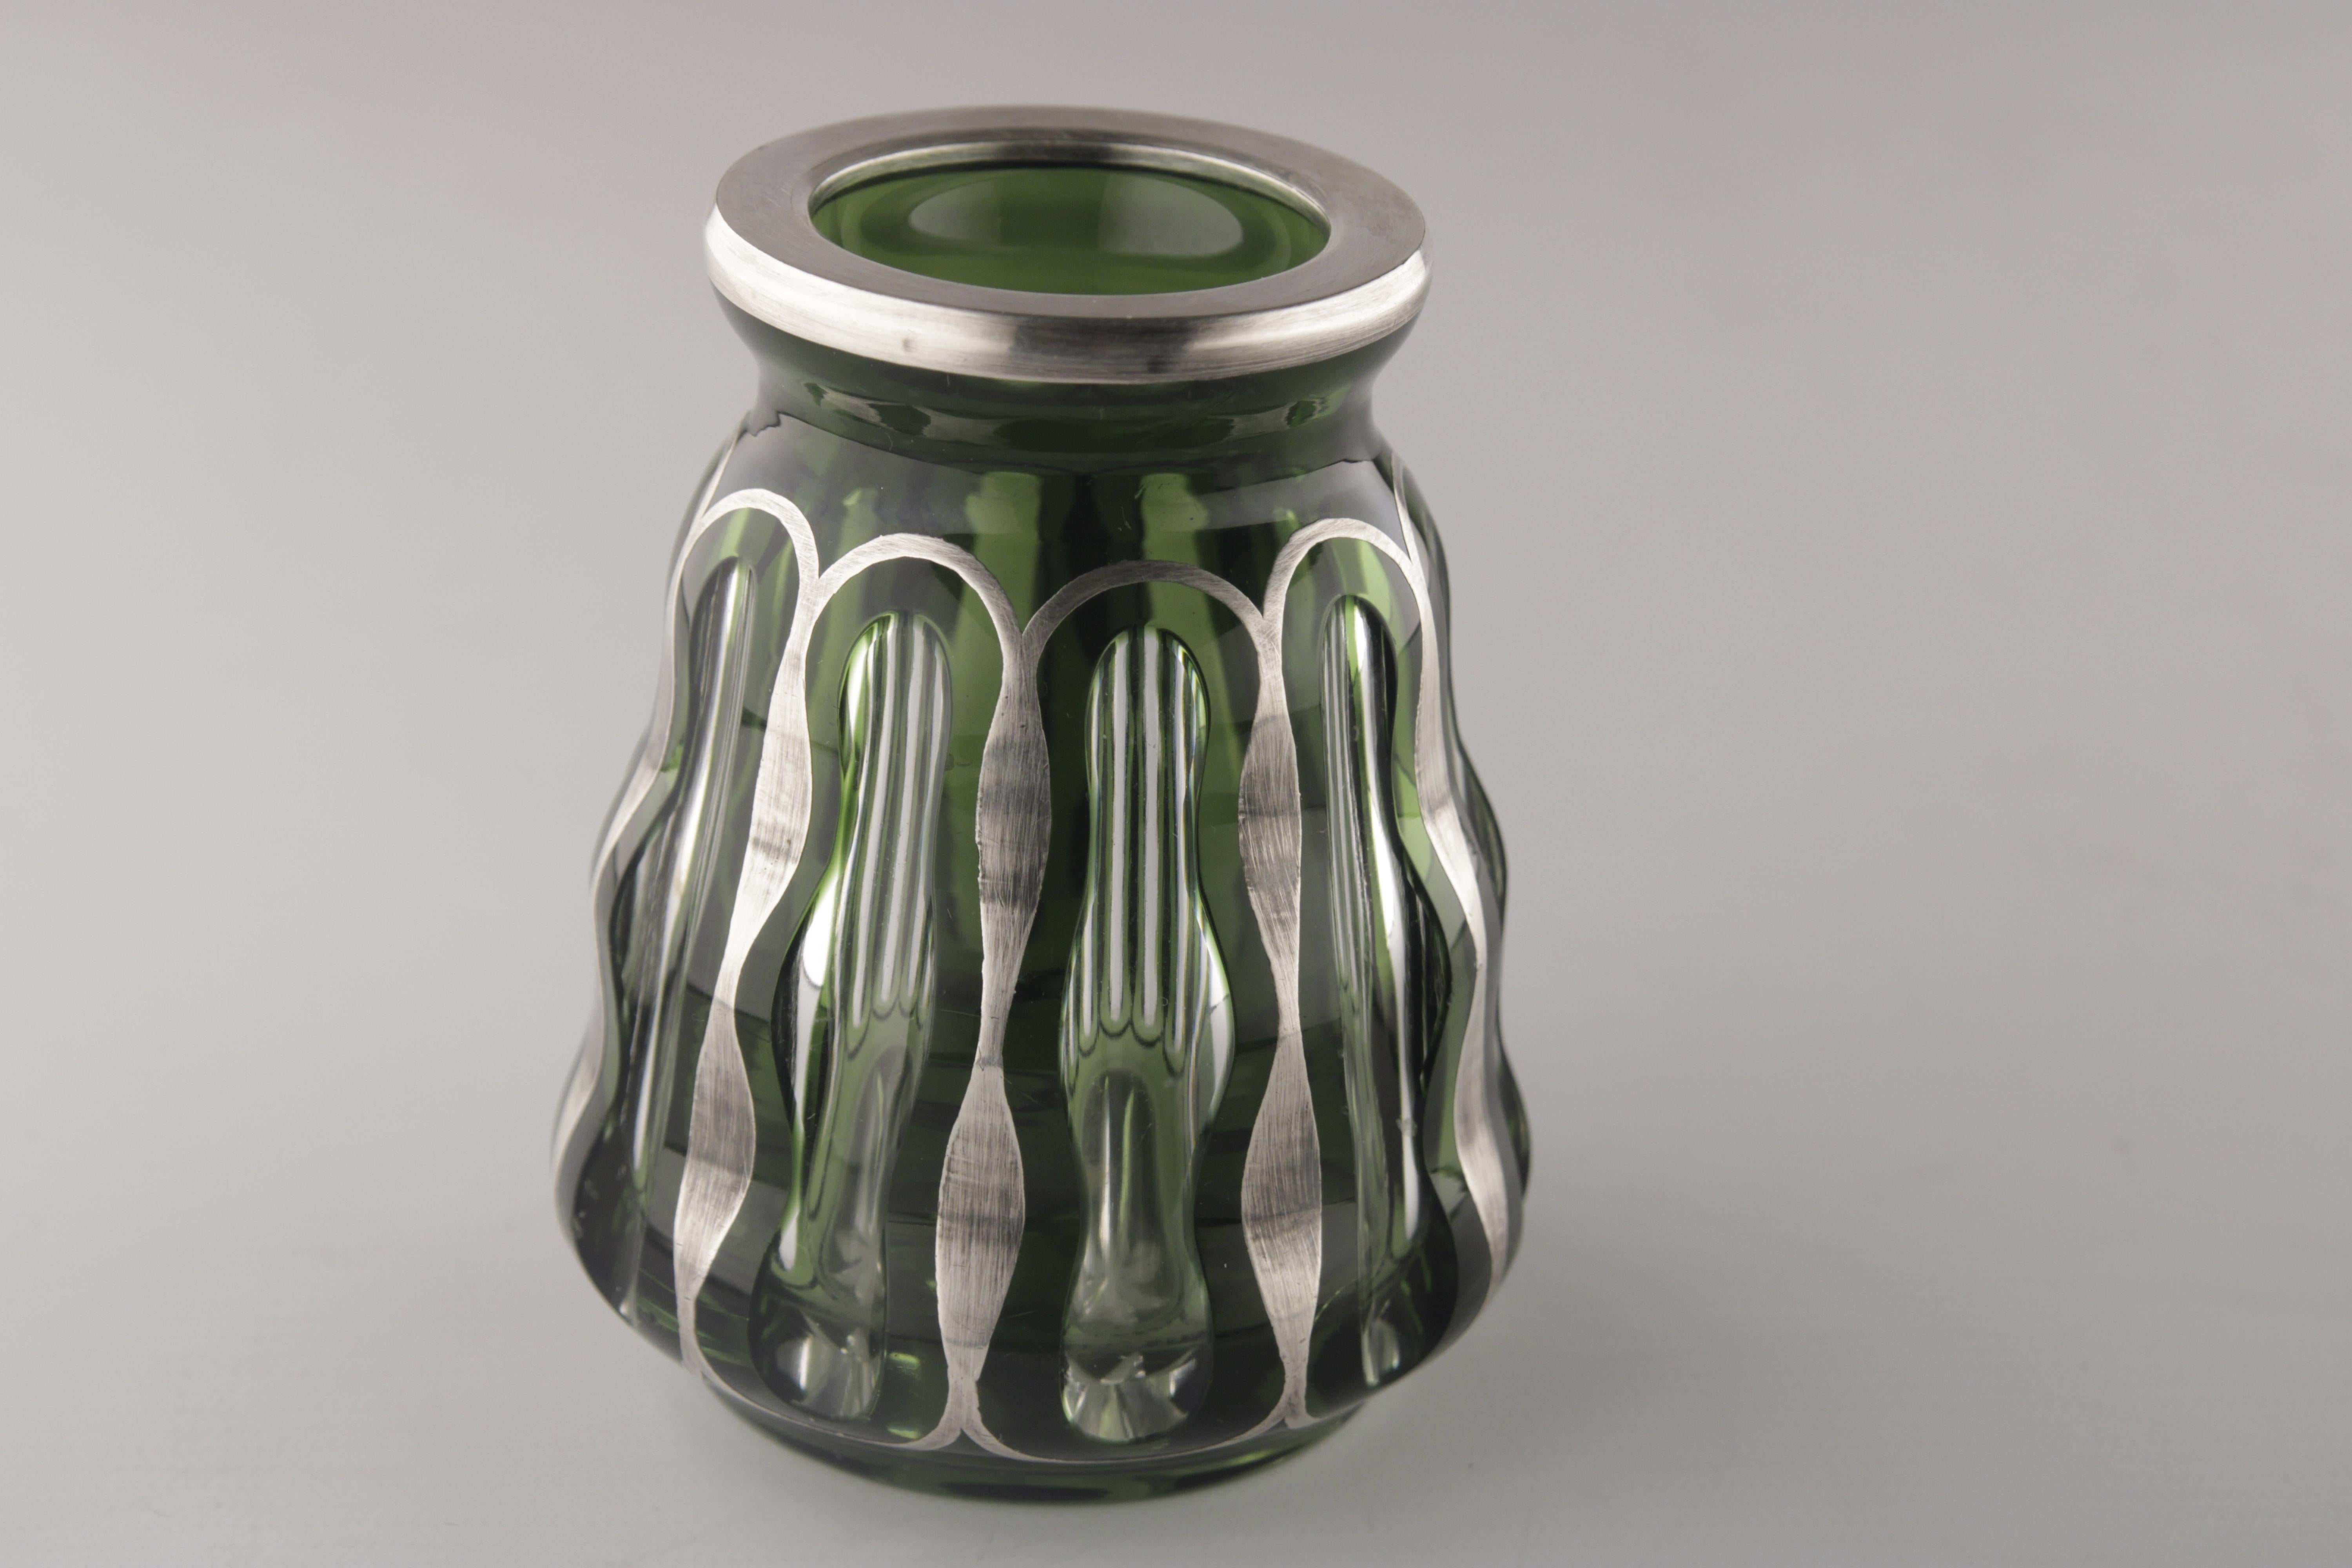 Czech Republic Vase Glass and Silver In Good Condition For Sale In Buenos Aires, Argentina